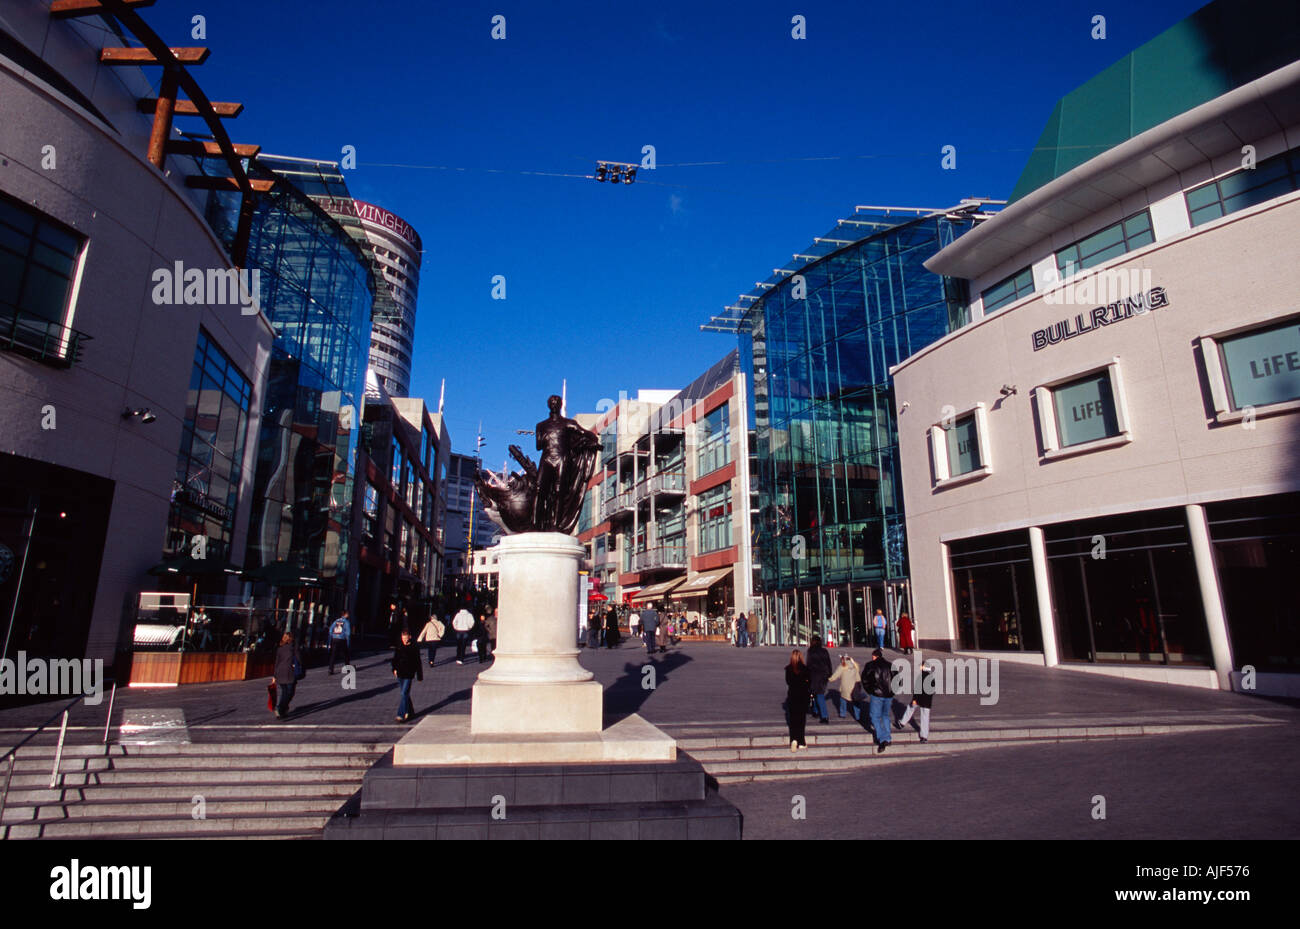 A statue of Lord Nelson outside the Bull Ring, Birmingham, UK Stock Photo